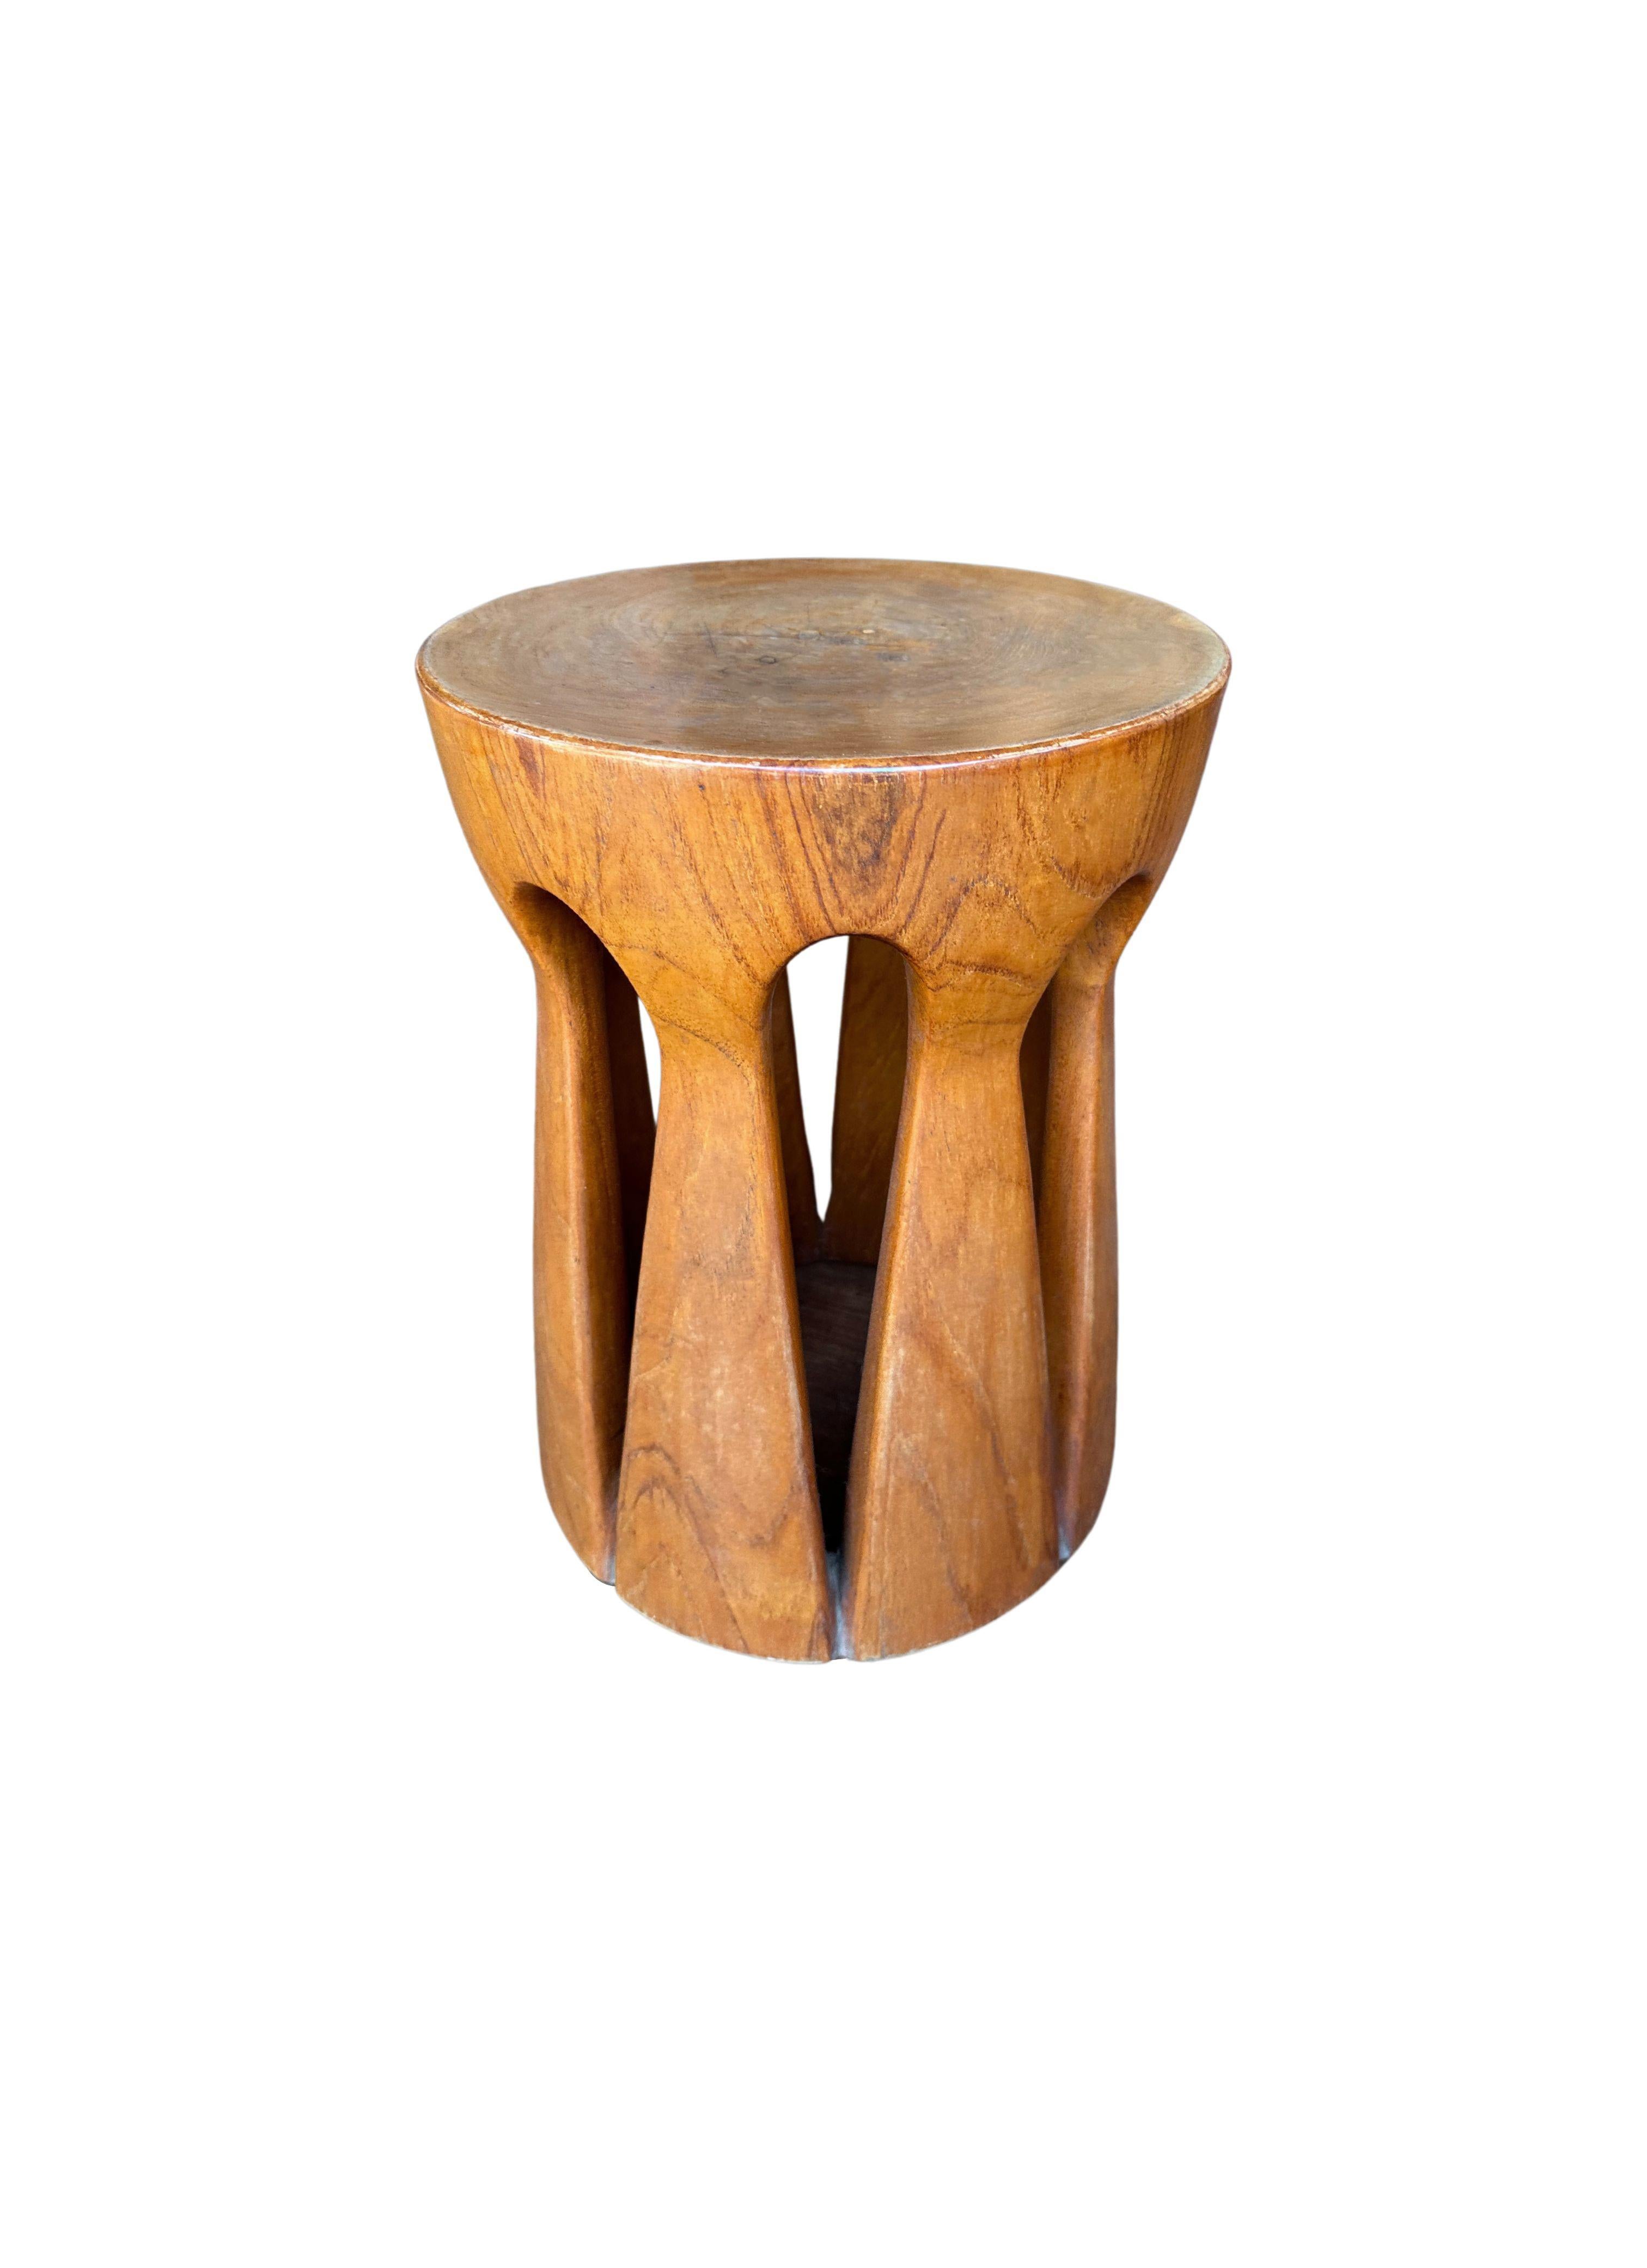 A wonderfully sculptural round teak wood stool. The stool is hollow in its center, however its unique leg structure allows it to remain robust and sturdy. Its subtle wood textures and shades make for a very elegant stool.